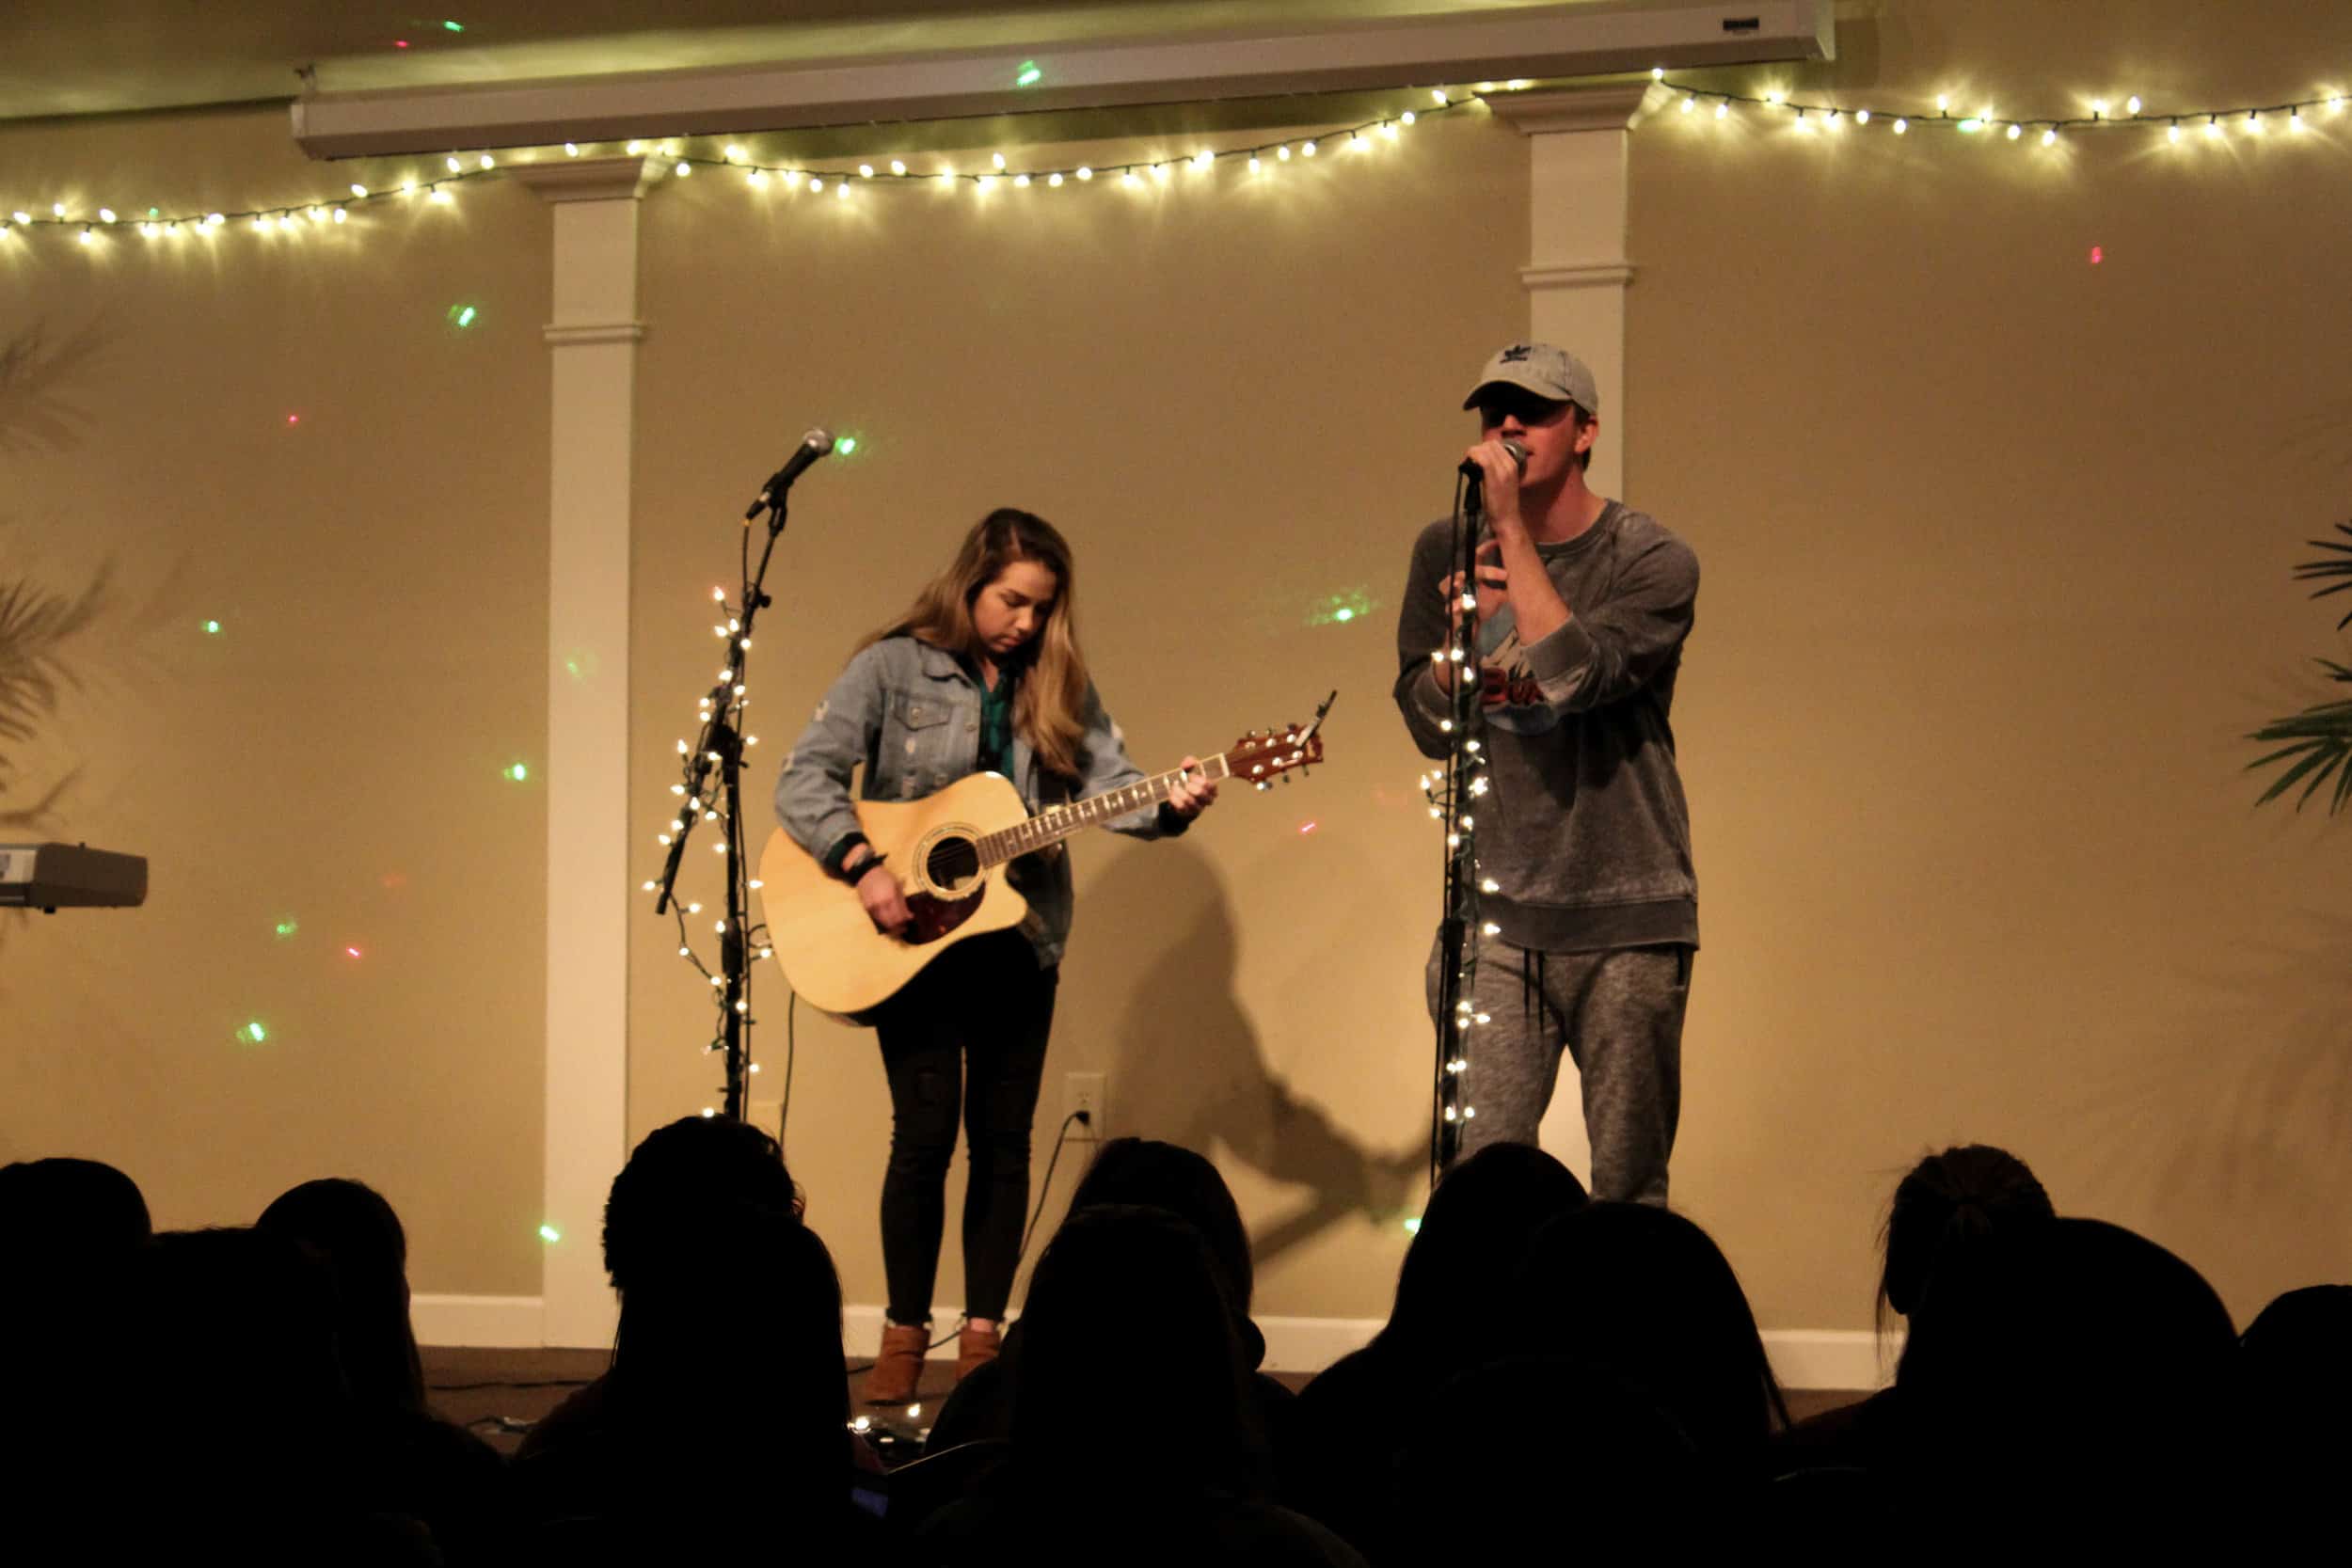 As Katelyn Carter plays the guitar, she and Nick Boggs sing together.